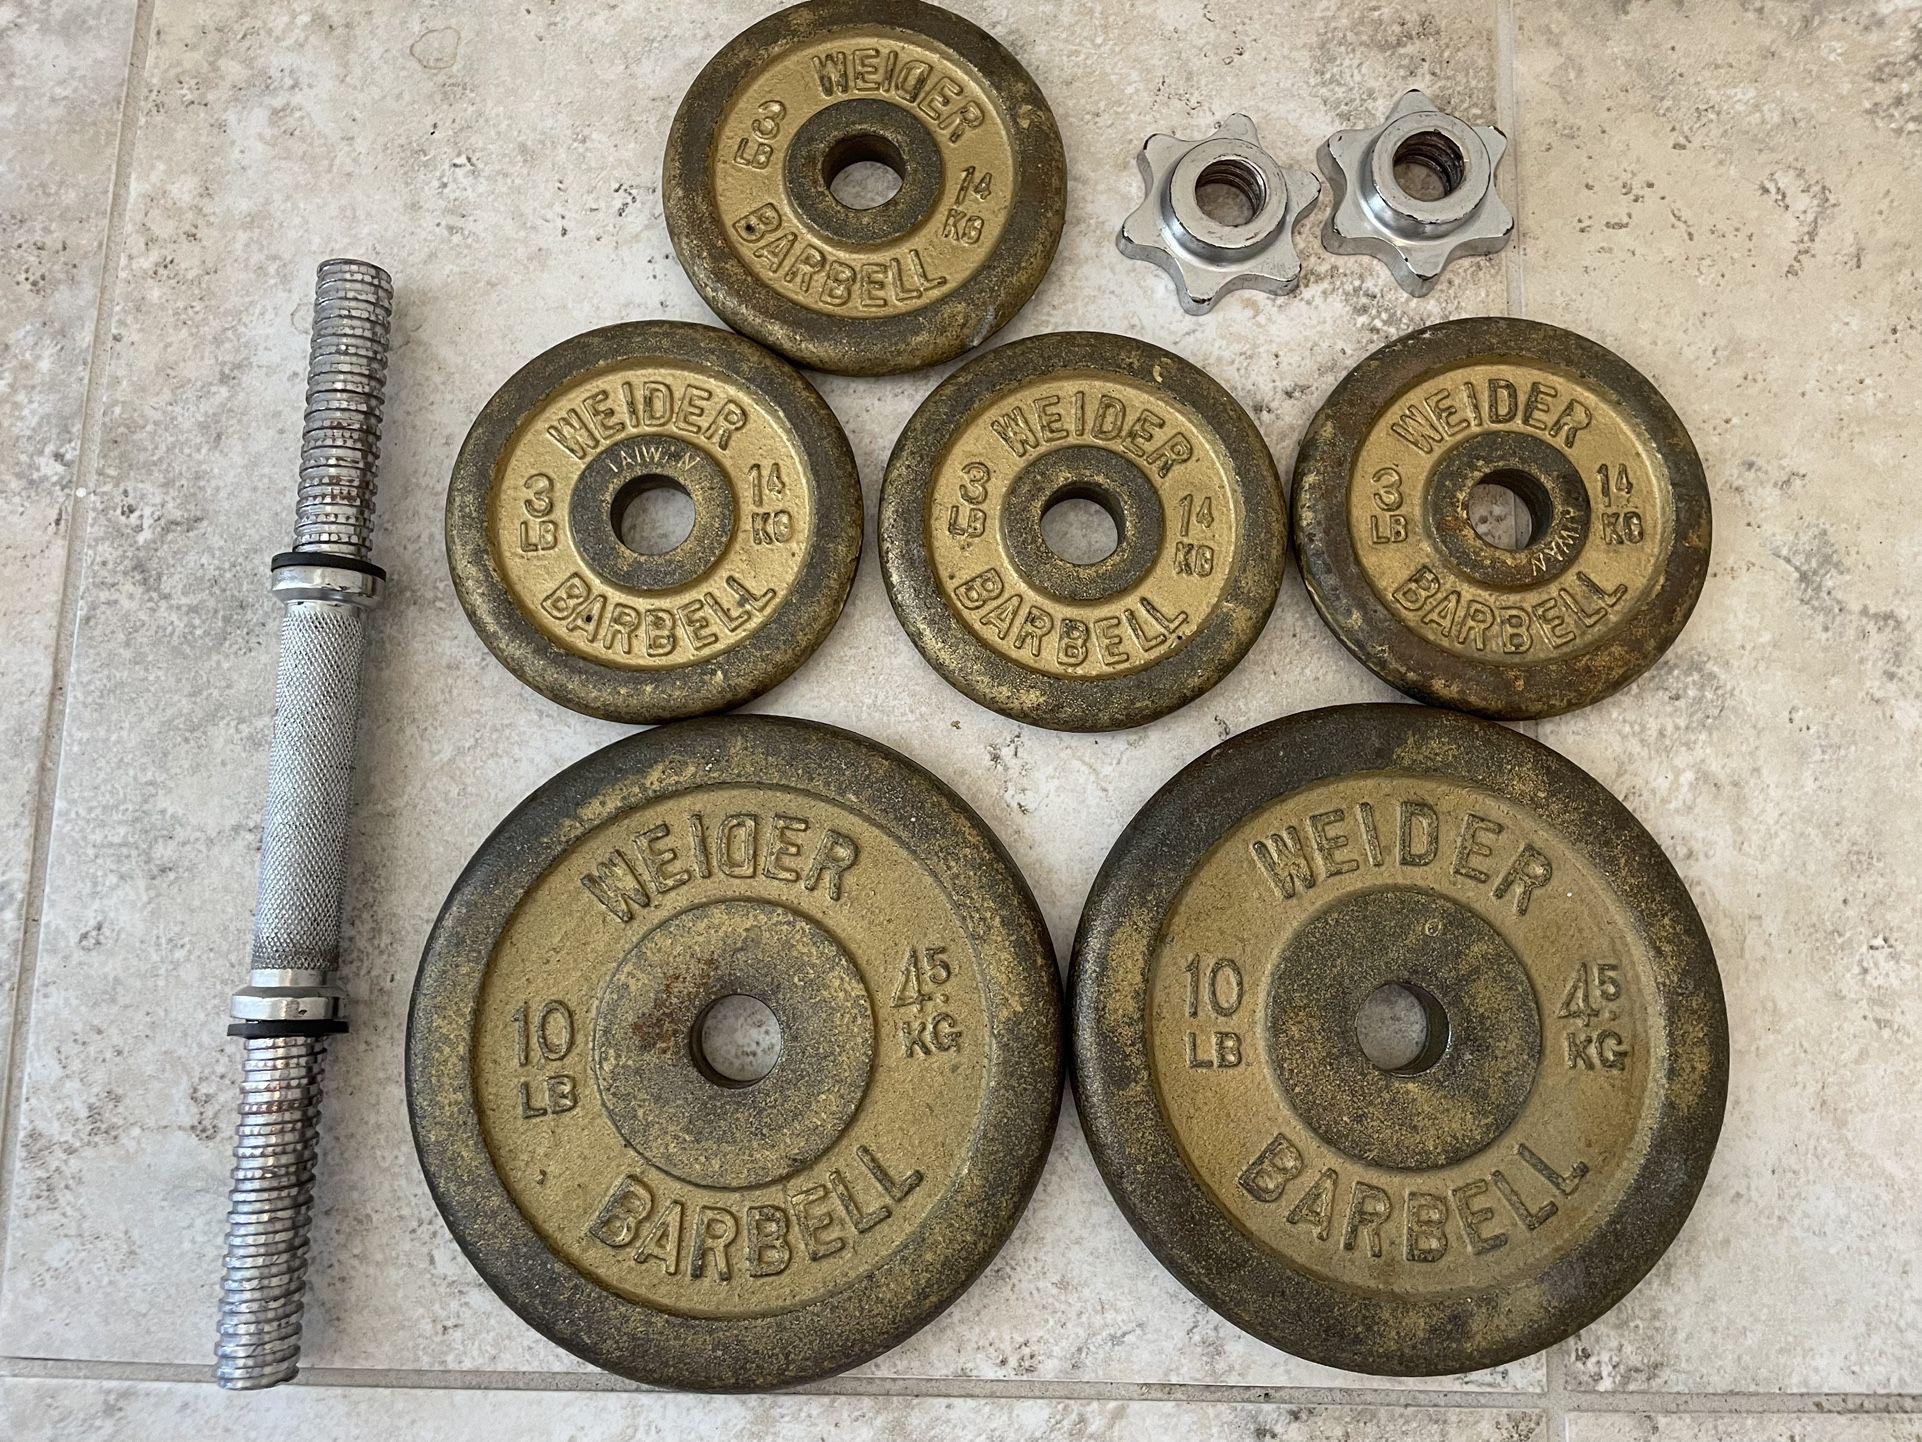 VINTAGE WEIDER 10 LB & 3 LB BARBELL WEIGHT PLATES STANDARD 1" HOLE